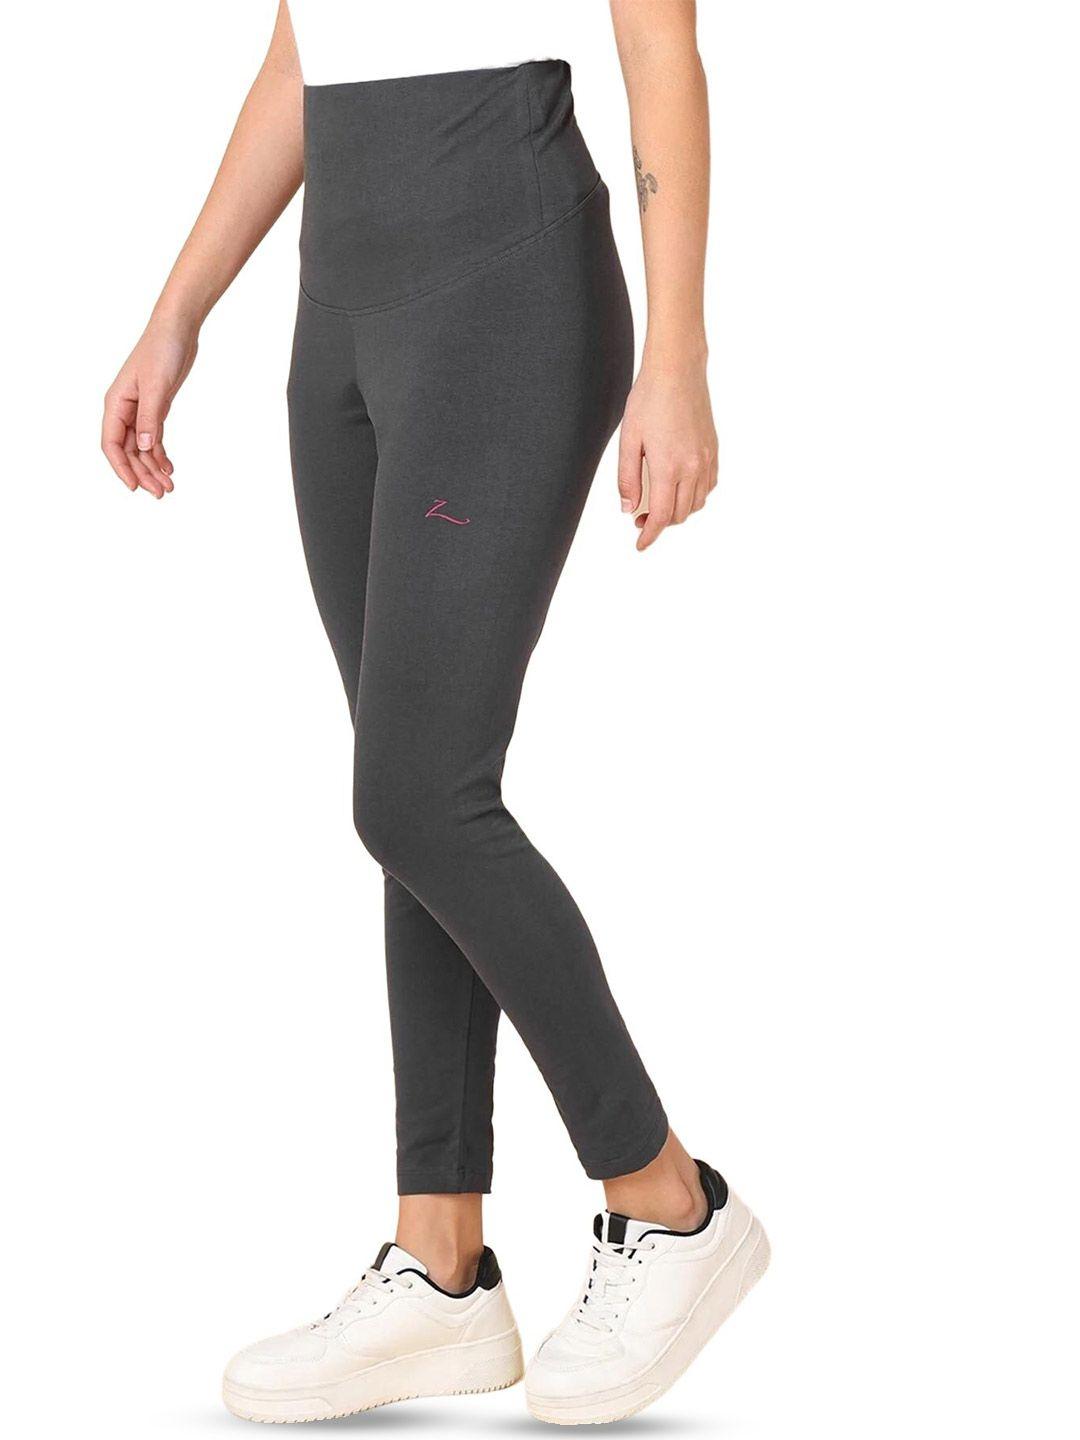 house of zelena ankle-length cotton maternity yoga tights